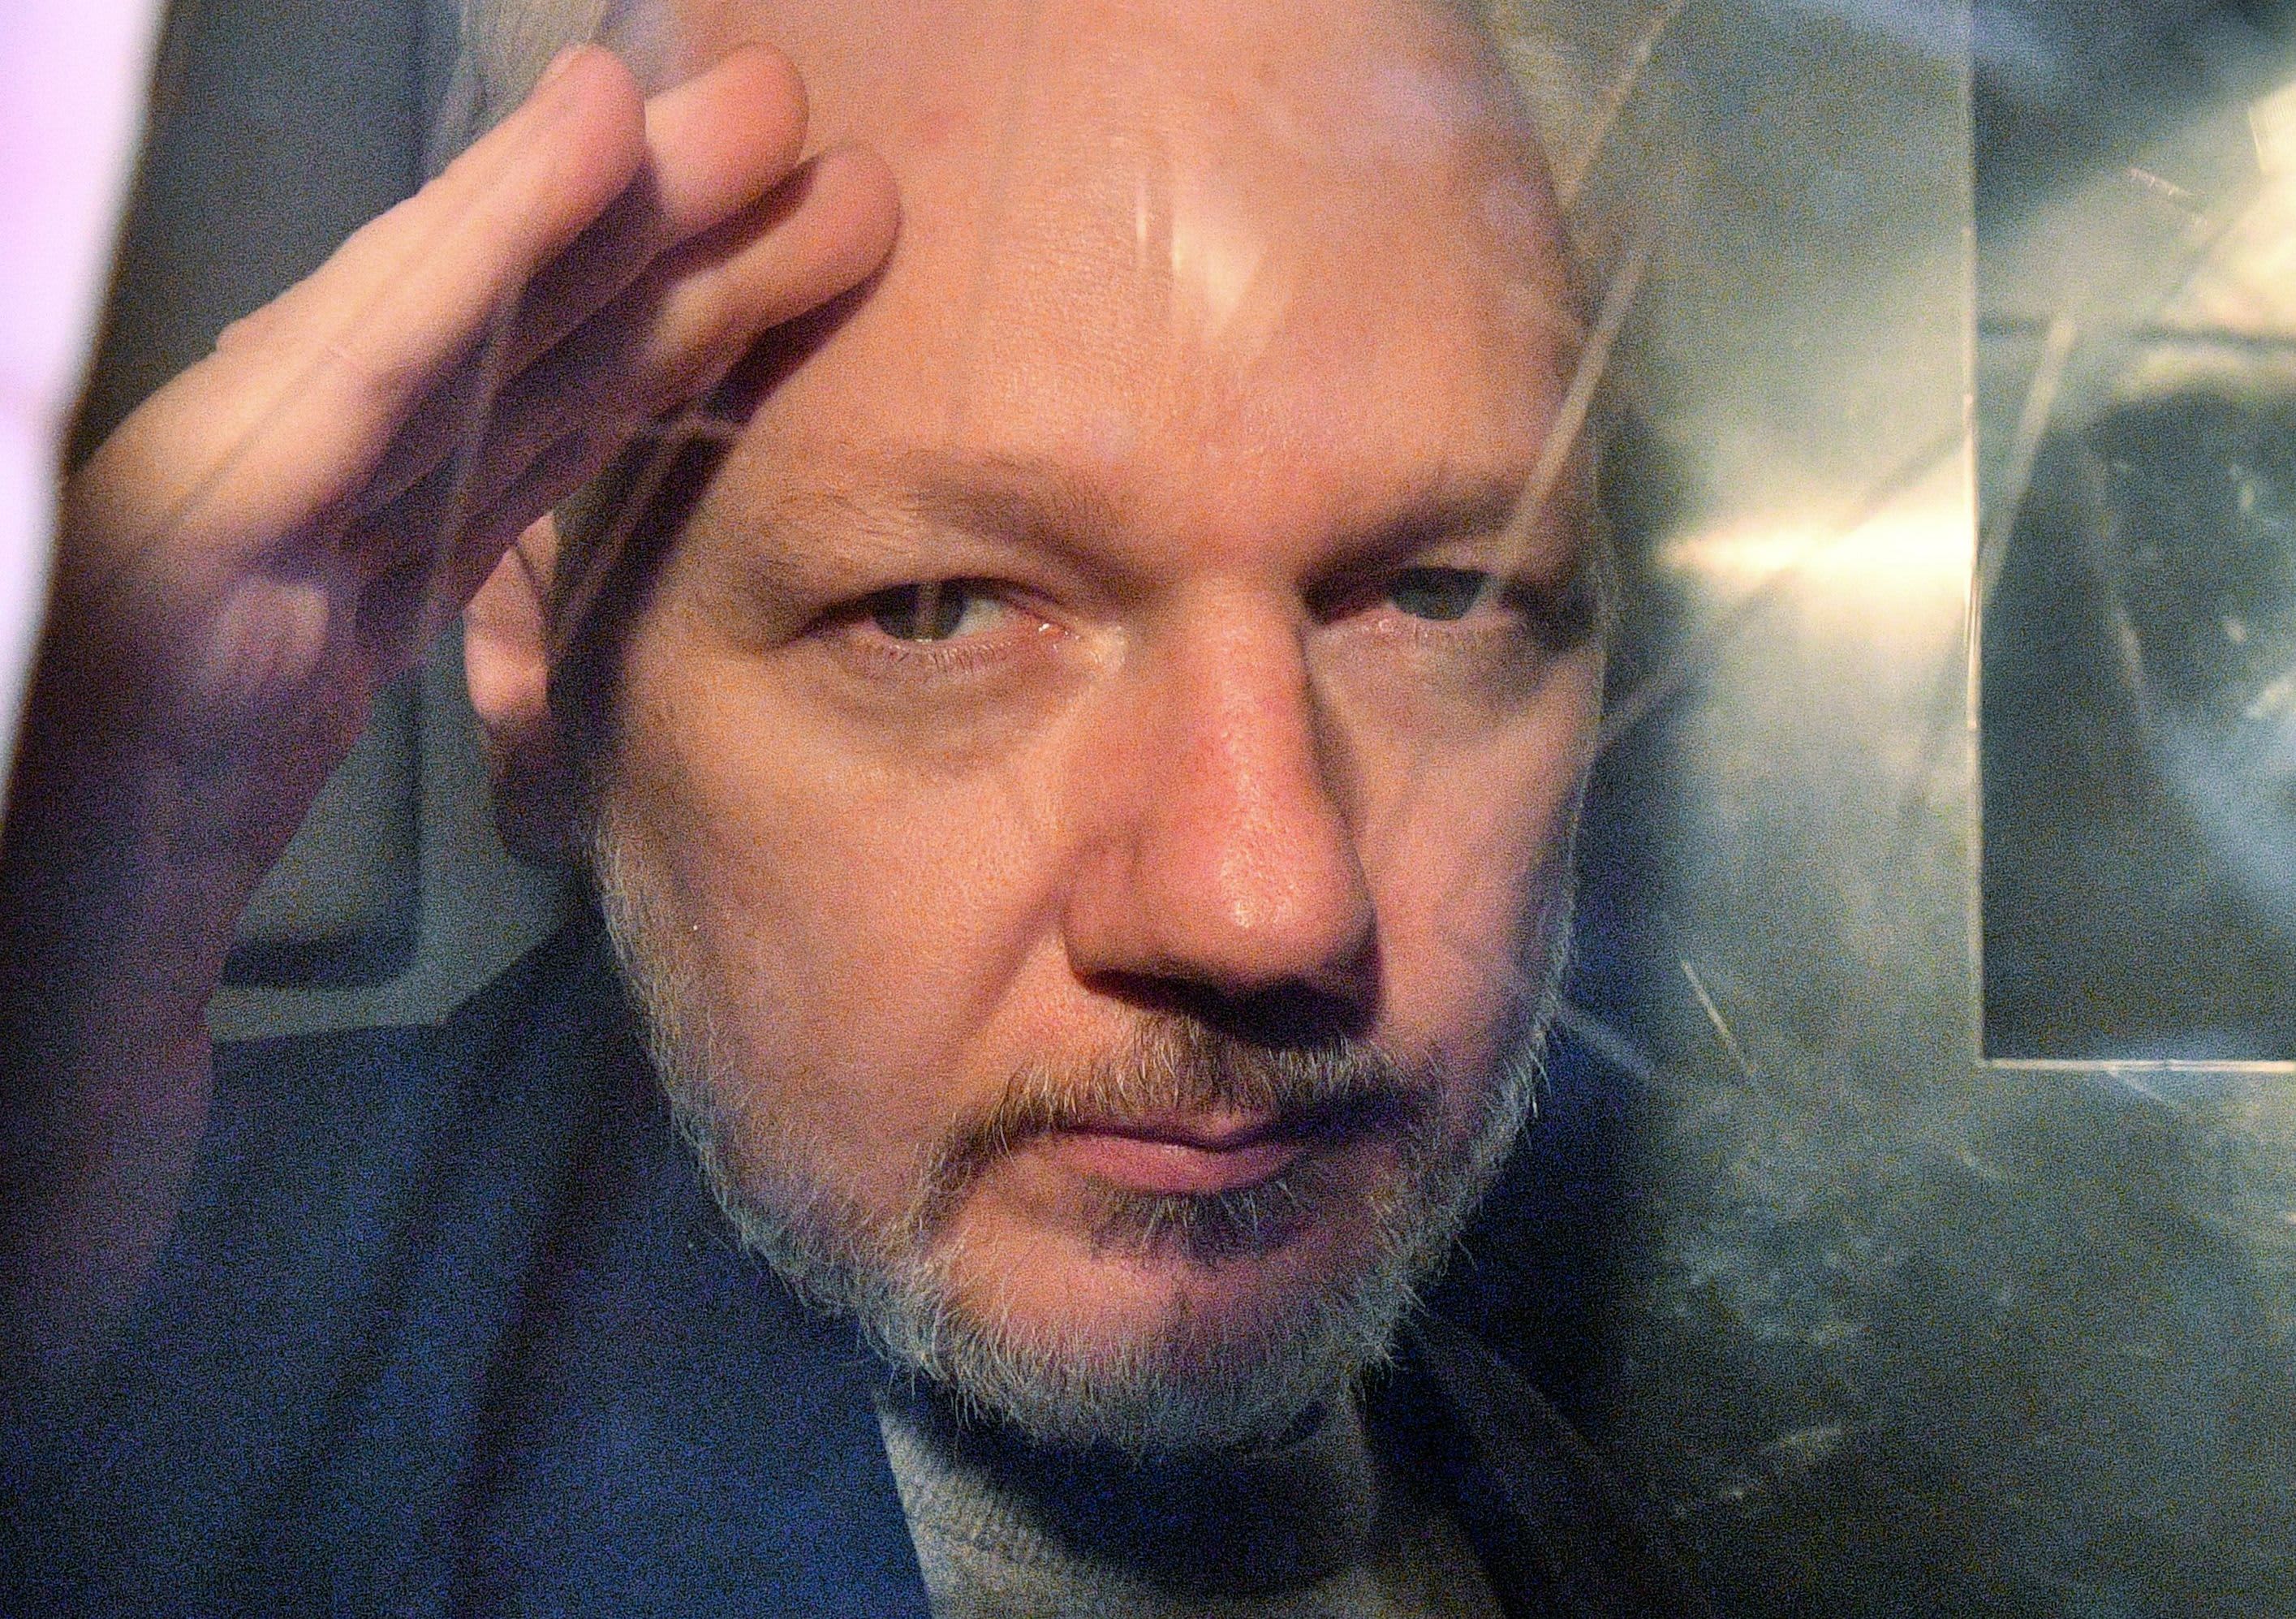 Julian Assange, founder of WikiLeaks, cannot be extradited to the US, the judge decides